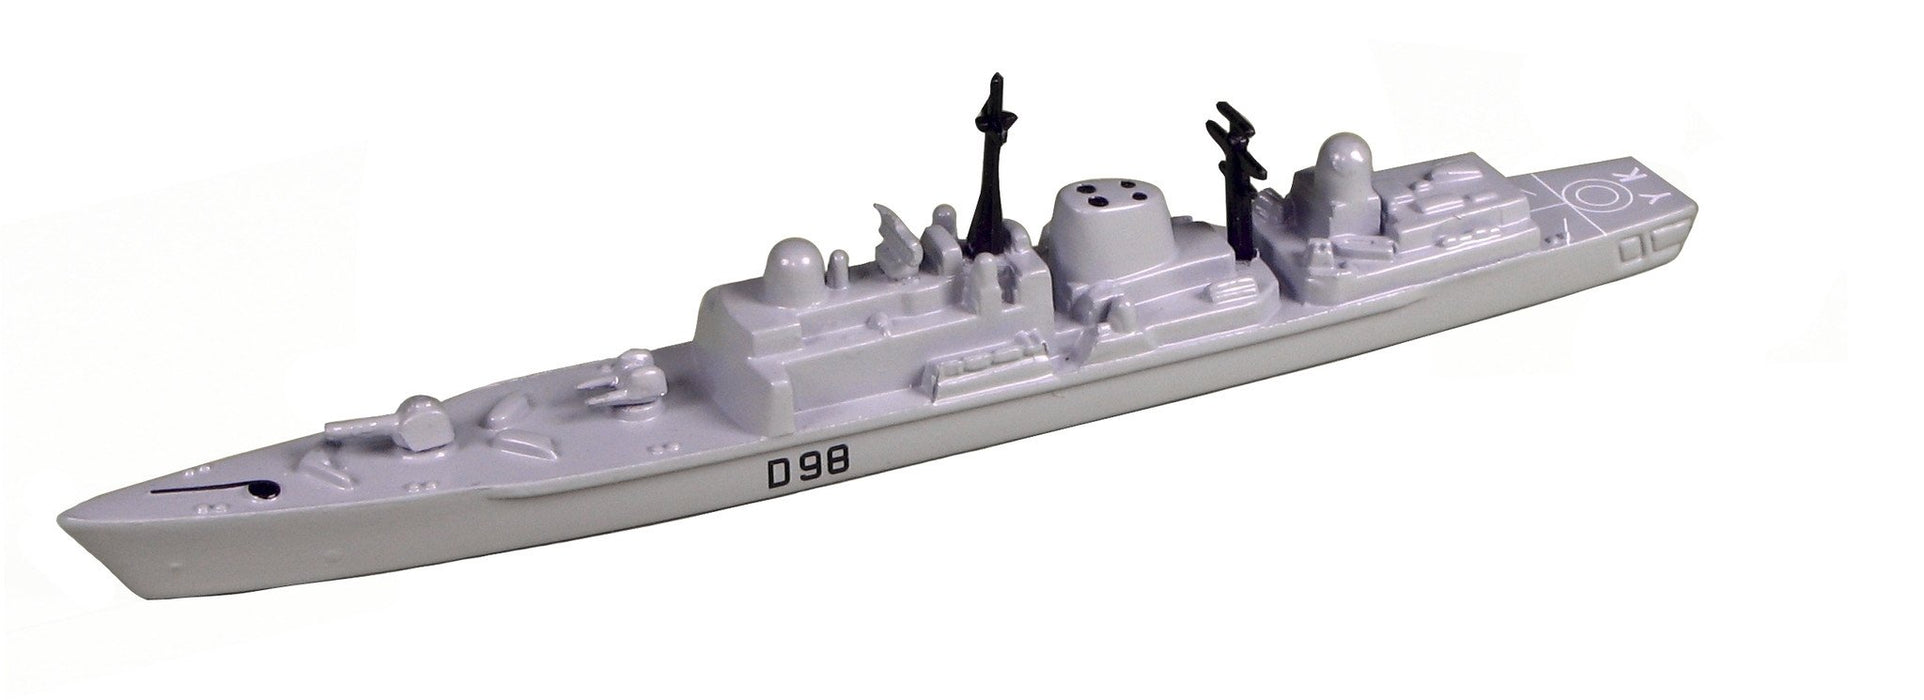 TRIANG TR1P750D98 HMS York D98 Triang 1:1200 Scale Model Navy Theme